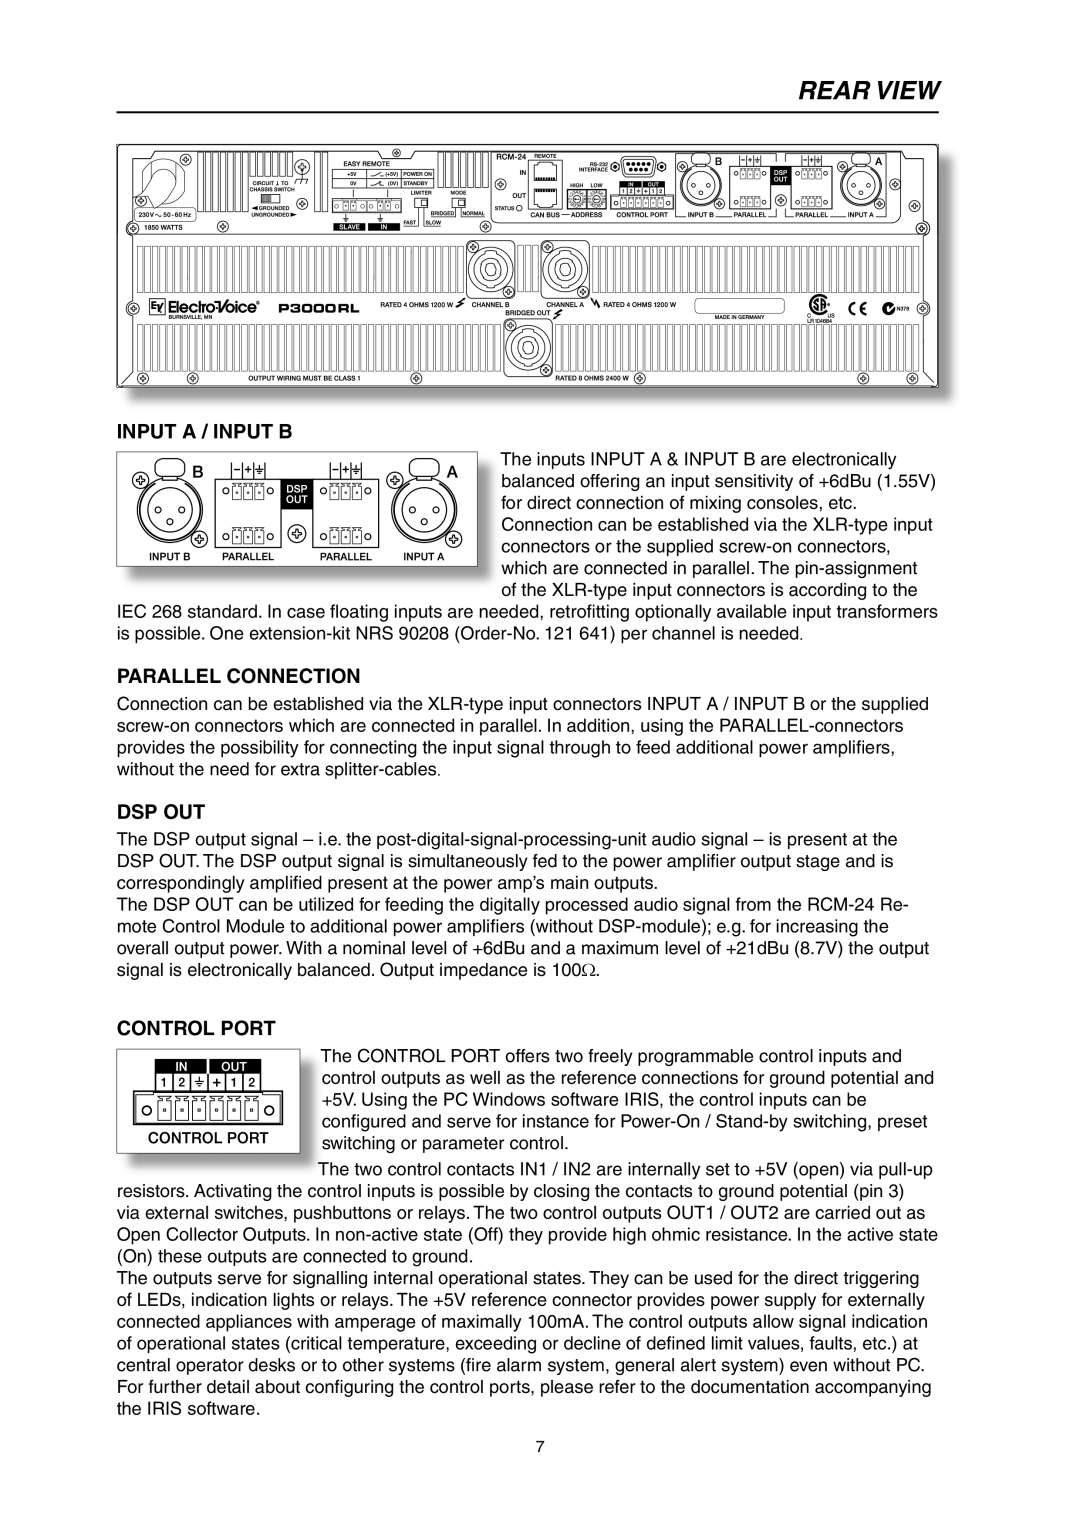 Electro-Voice P3000RL owner manual Rear View, Parallel Connection, Dsp Out, Control Port, Input A / Input B 